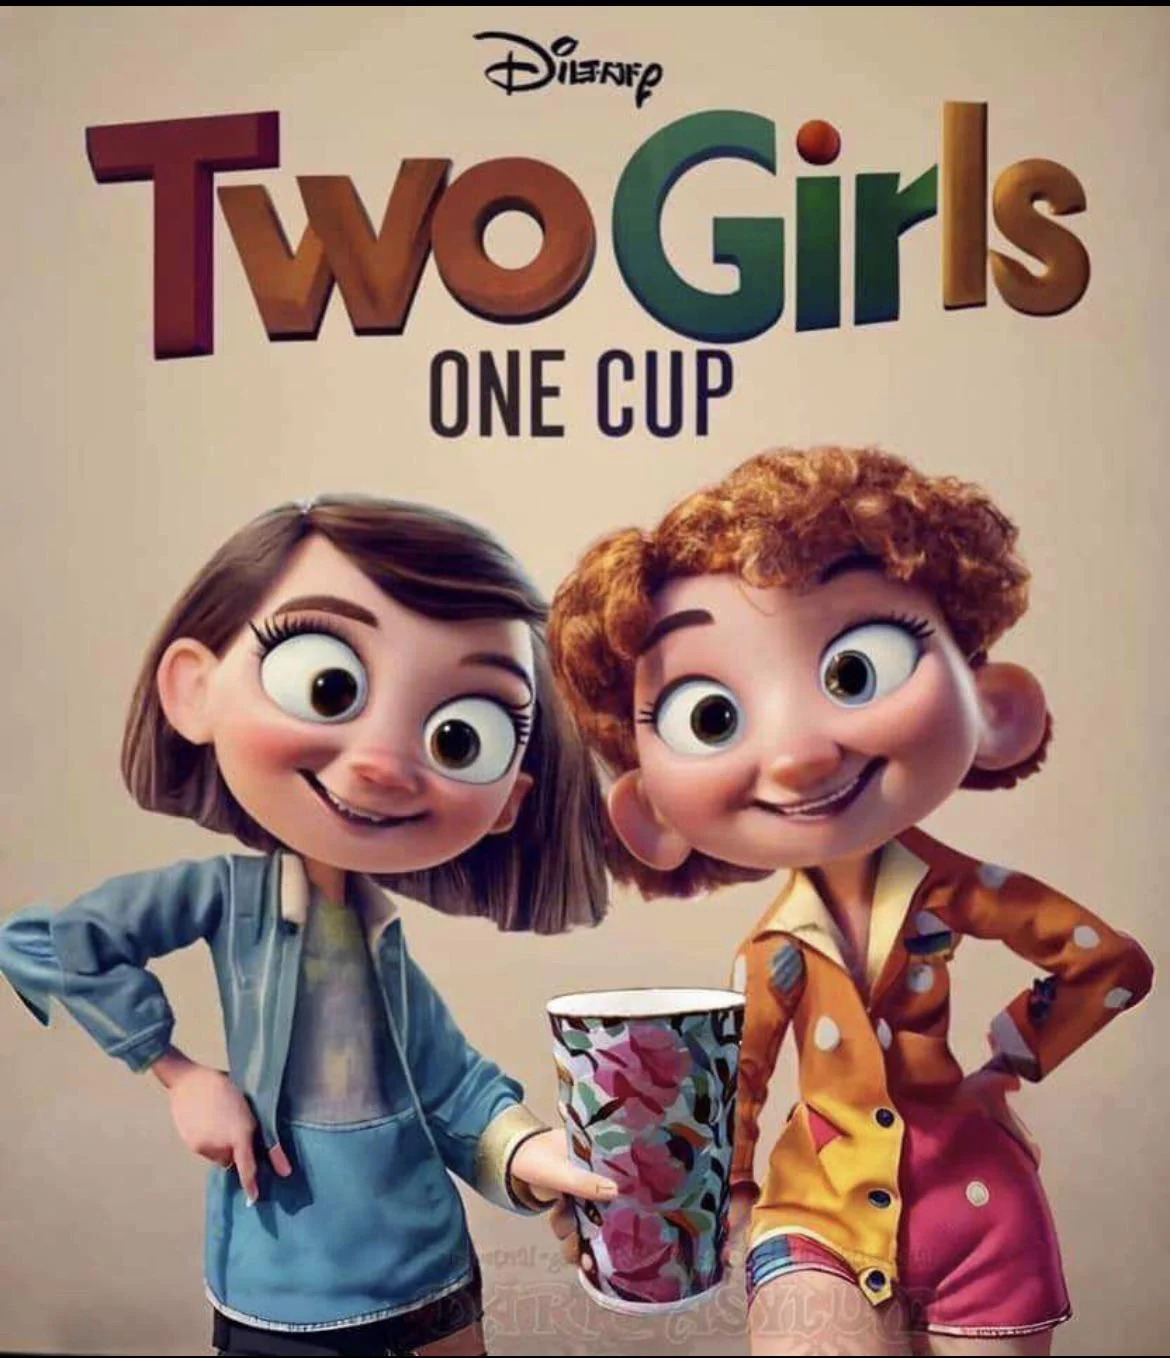 Two Girls One Cup